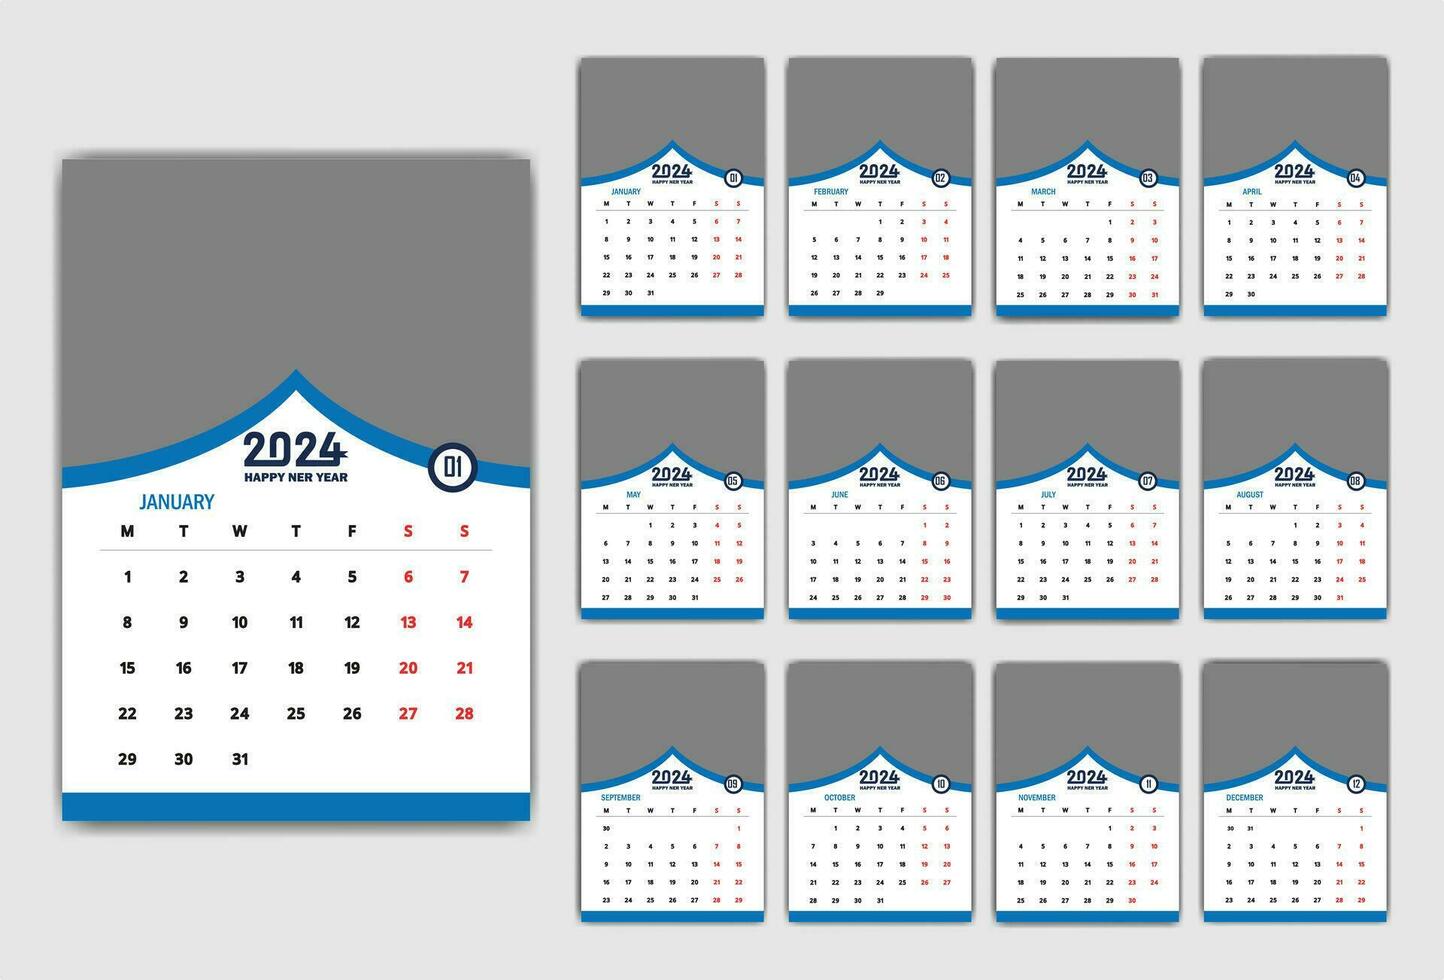 Wall Calendar 2024 new year single page 12 month annual calendar template. Monthly yearly calendar layout ready to print. 2024 annual calendar grid wall or desk layout. Planner for 2024 year, diary. vector